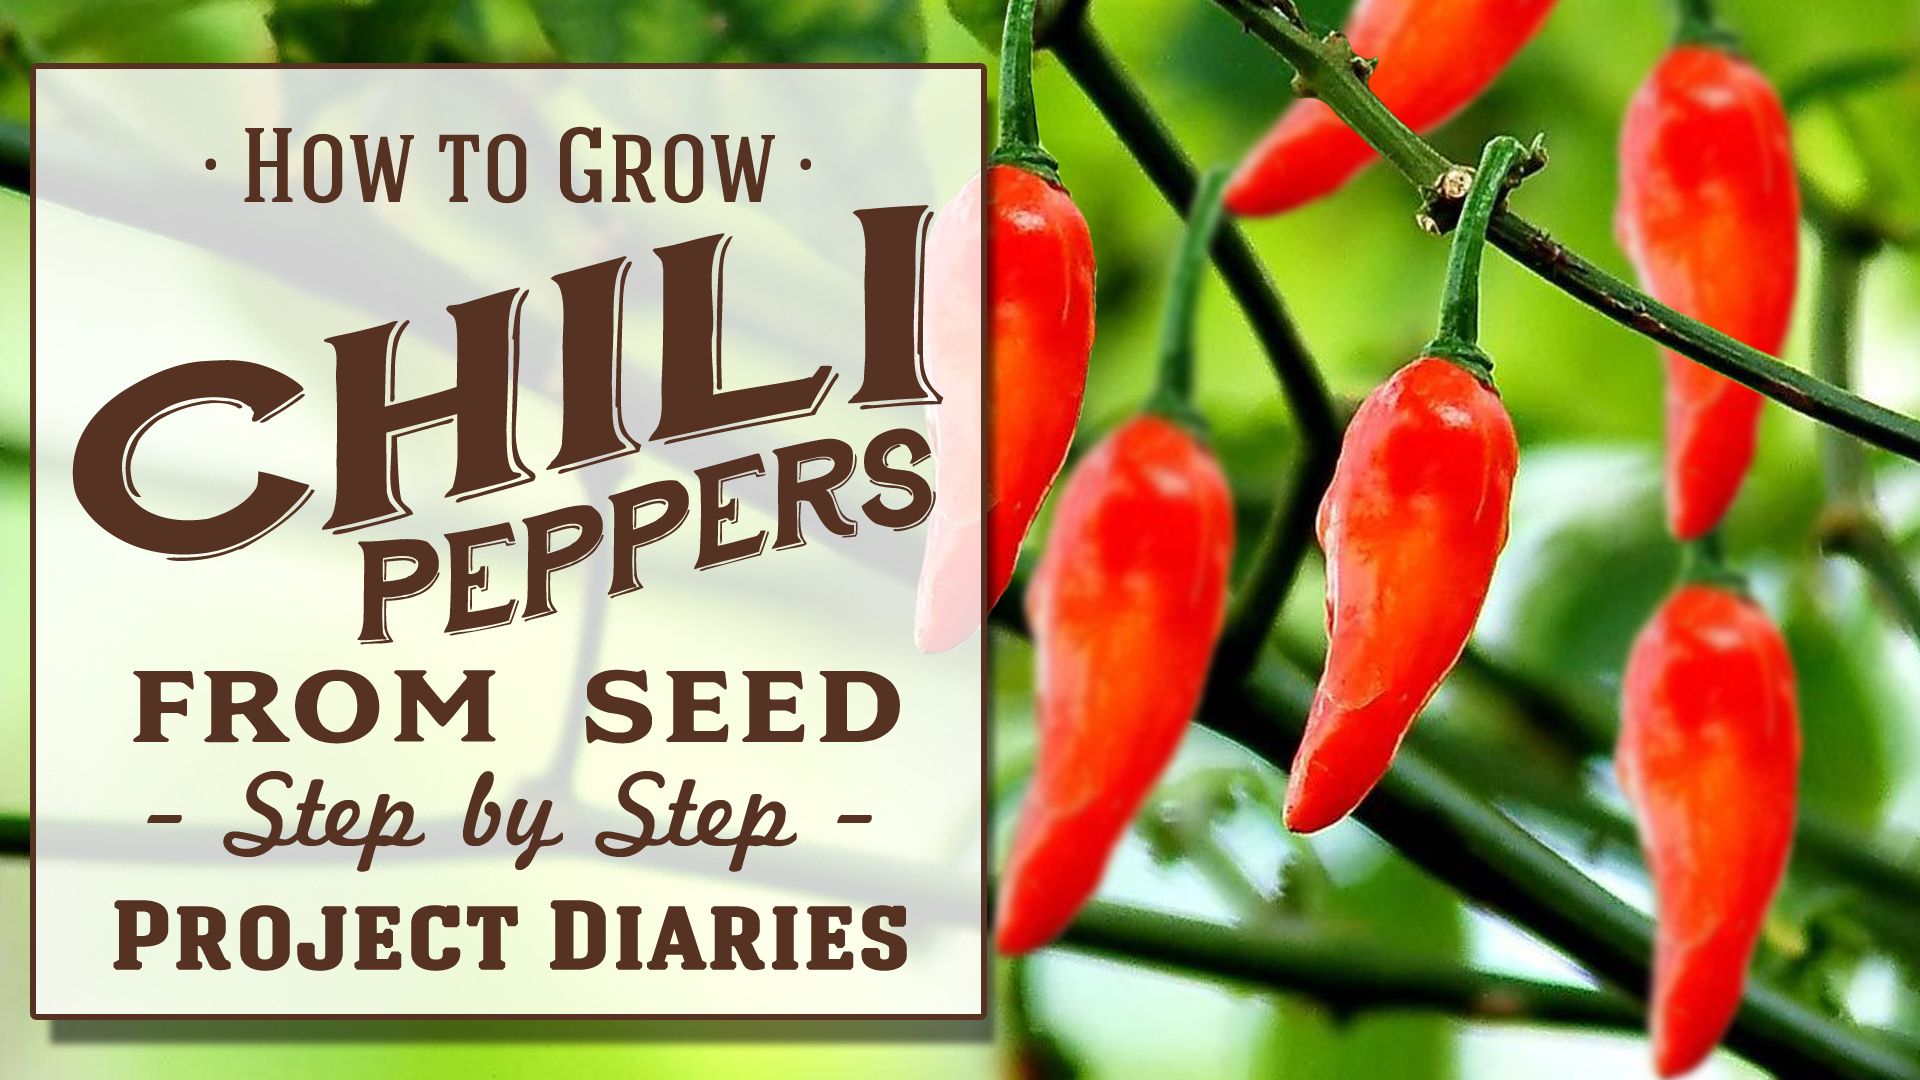 Chili Peppers from seed.jpg